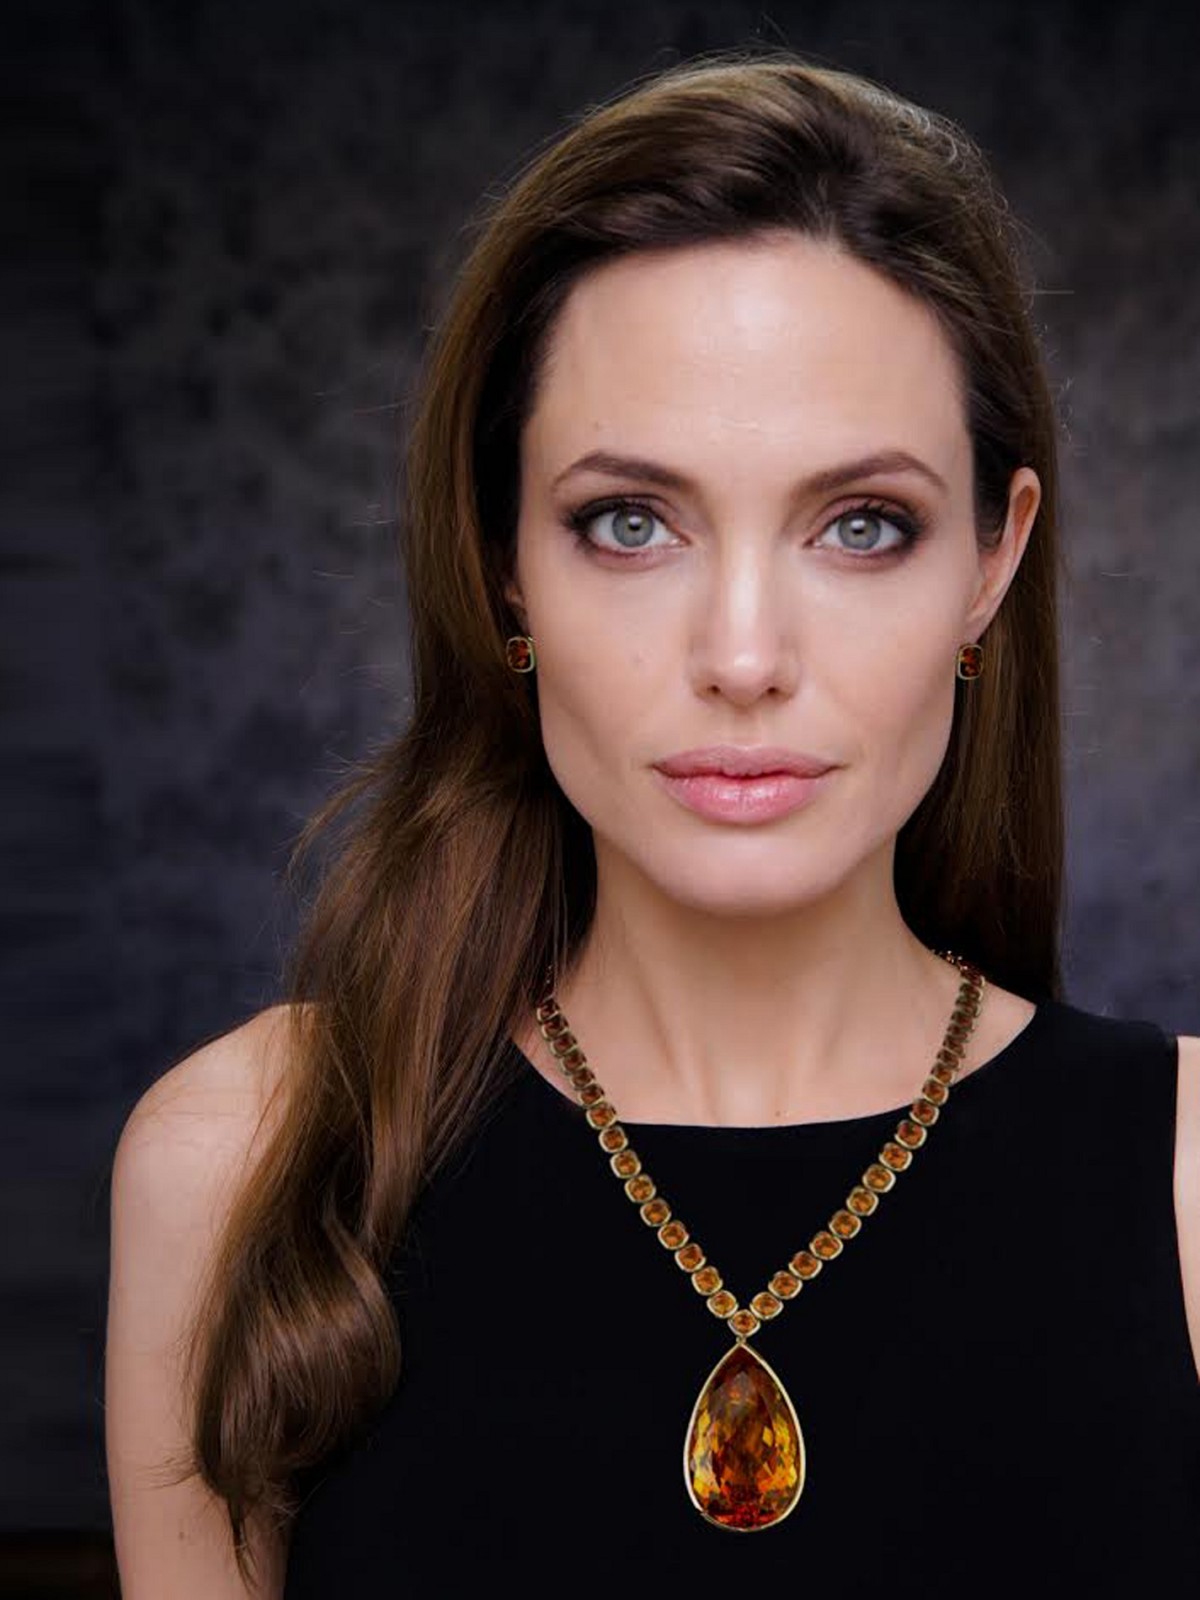 Robert Procop and Angelina Jolie necklace with 177.11-carat pear-shaped citrine drop